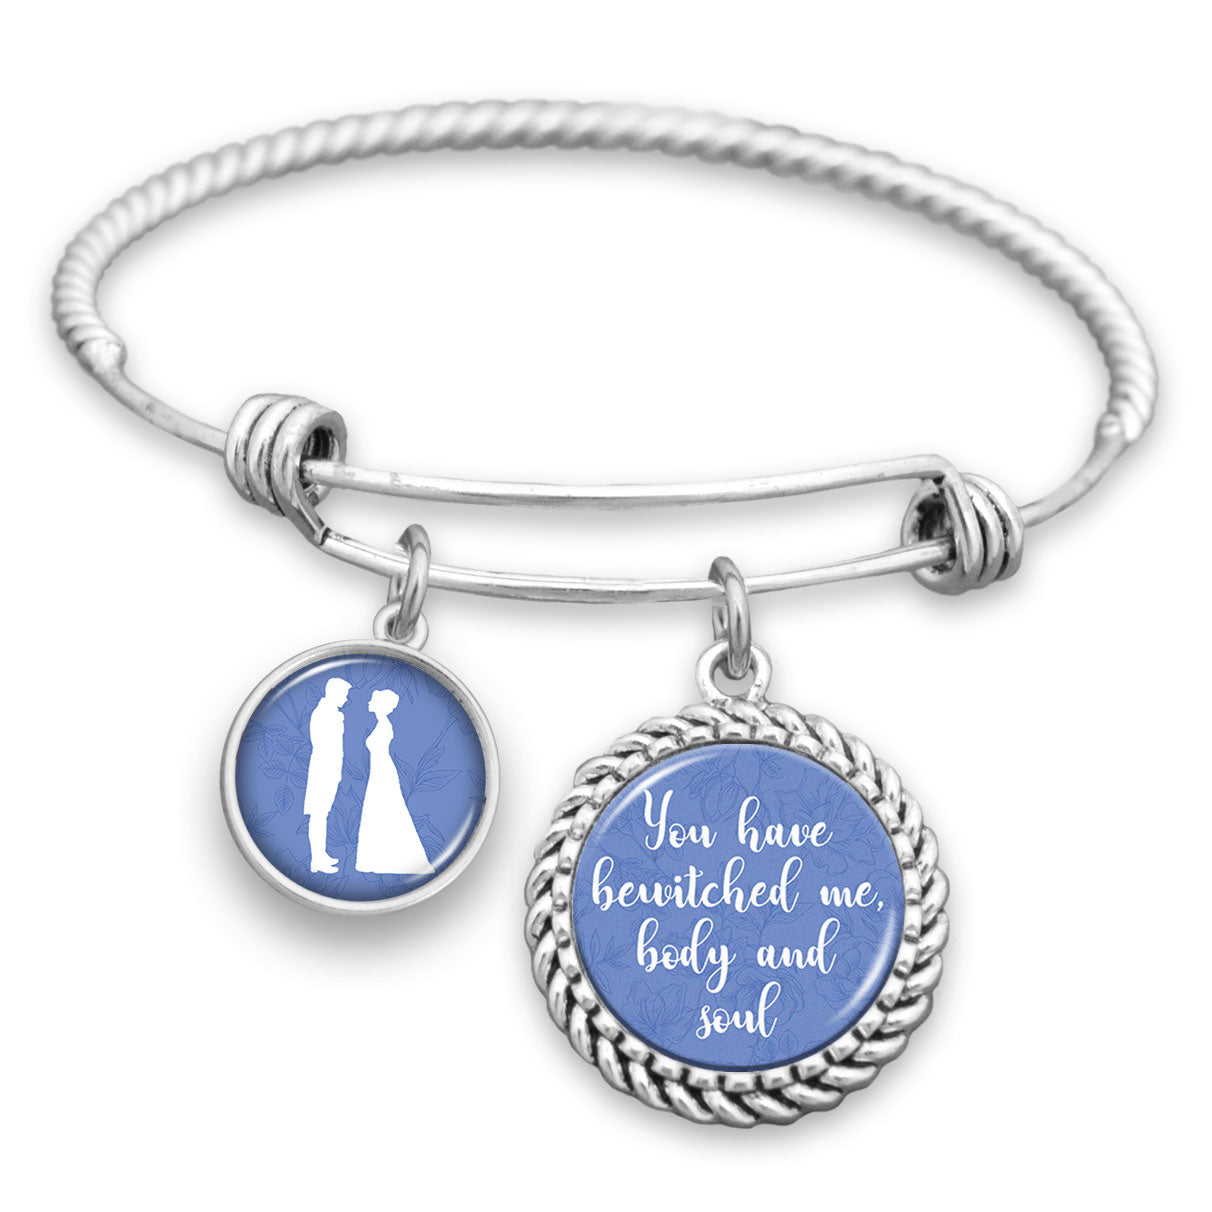 You Have Bewitched Me, Body And Soul Charm Bracelet